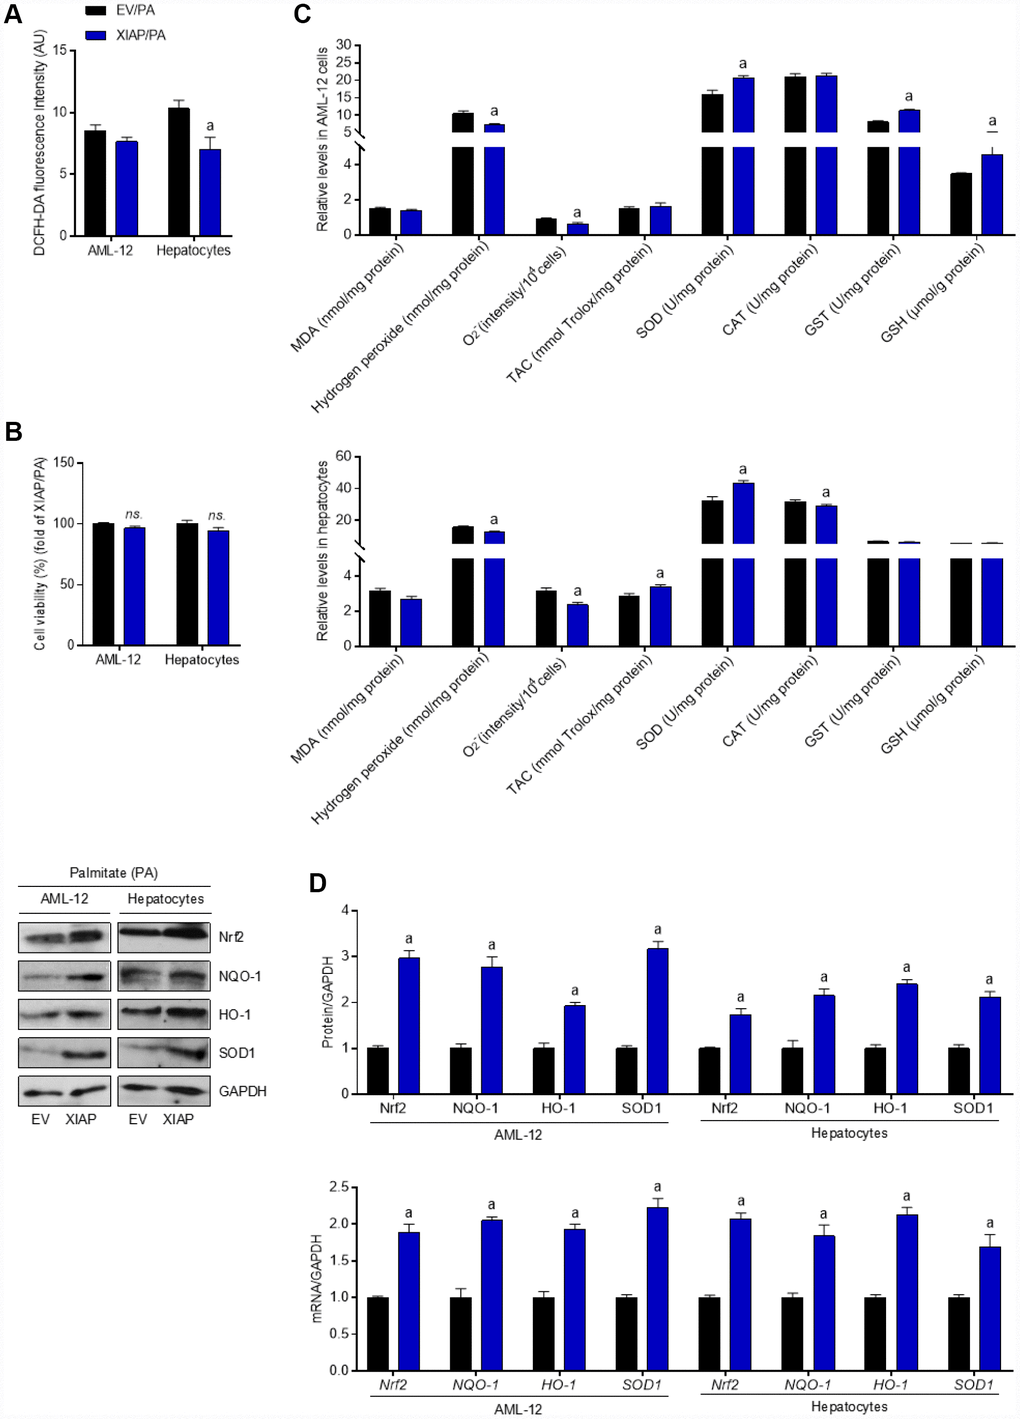 Over expression of XIAP restrains PA-induced oxidative stress in vitro. AML-12 and primary hepatocytes were transfected with pUNO1/XIAP plasmid for 24 h, followed by PA (250 μM) treatment for additional 24 h. Subsequently, further studies were detected. (A and B) Determination of cellular ROS production and cell viability. (C) Calculation of cellular MDA, H2O2, O2- levels, TAC, SOD, CAT, GST and GSH activities. (D) Western blot and qPCR analysis showed the alteration of SOD1, NQO-1, HO-1 and Nrf-2 in cells treated as described. For all bar plots shown, data are expressed as the mean ± SEM. n = 8 per group. ap 